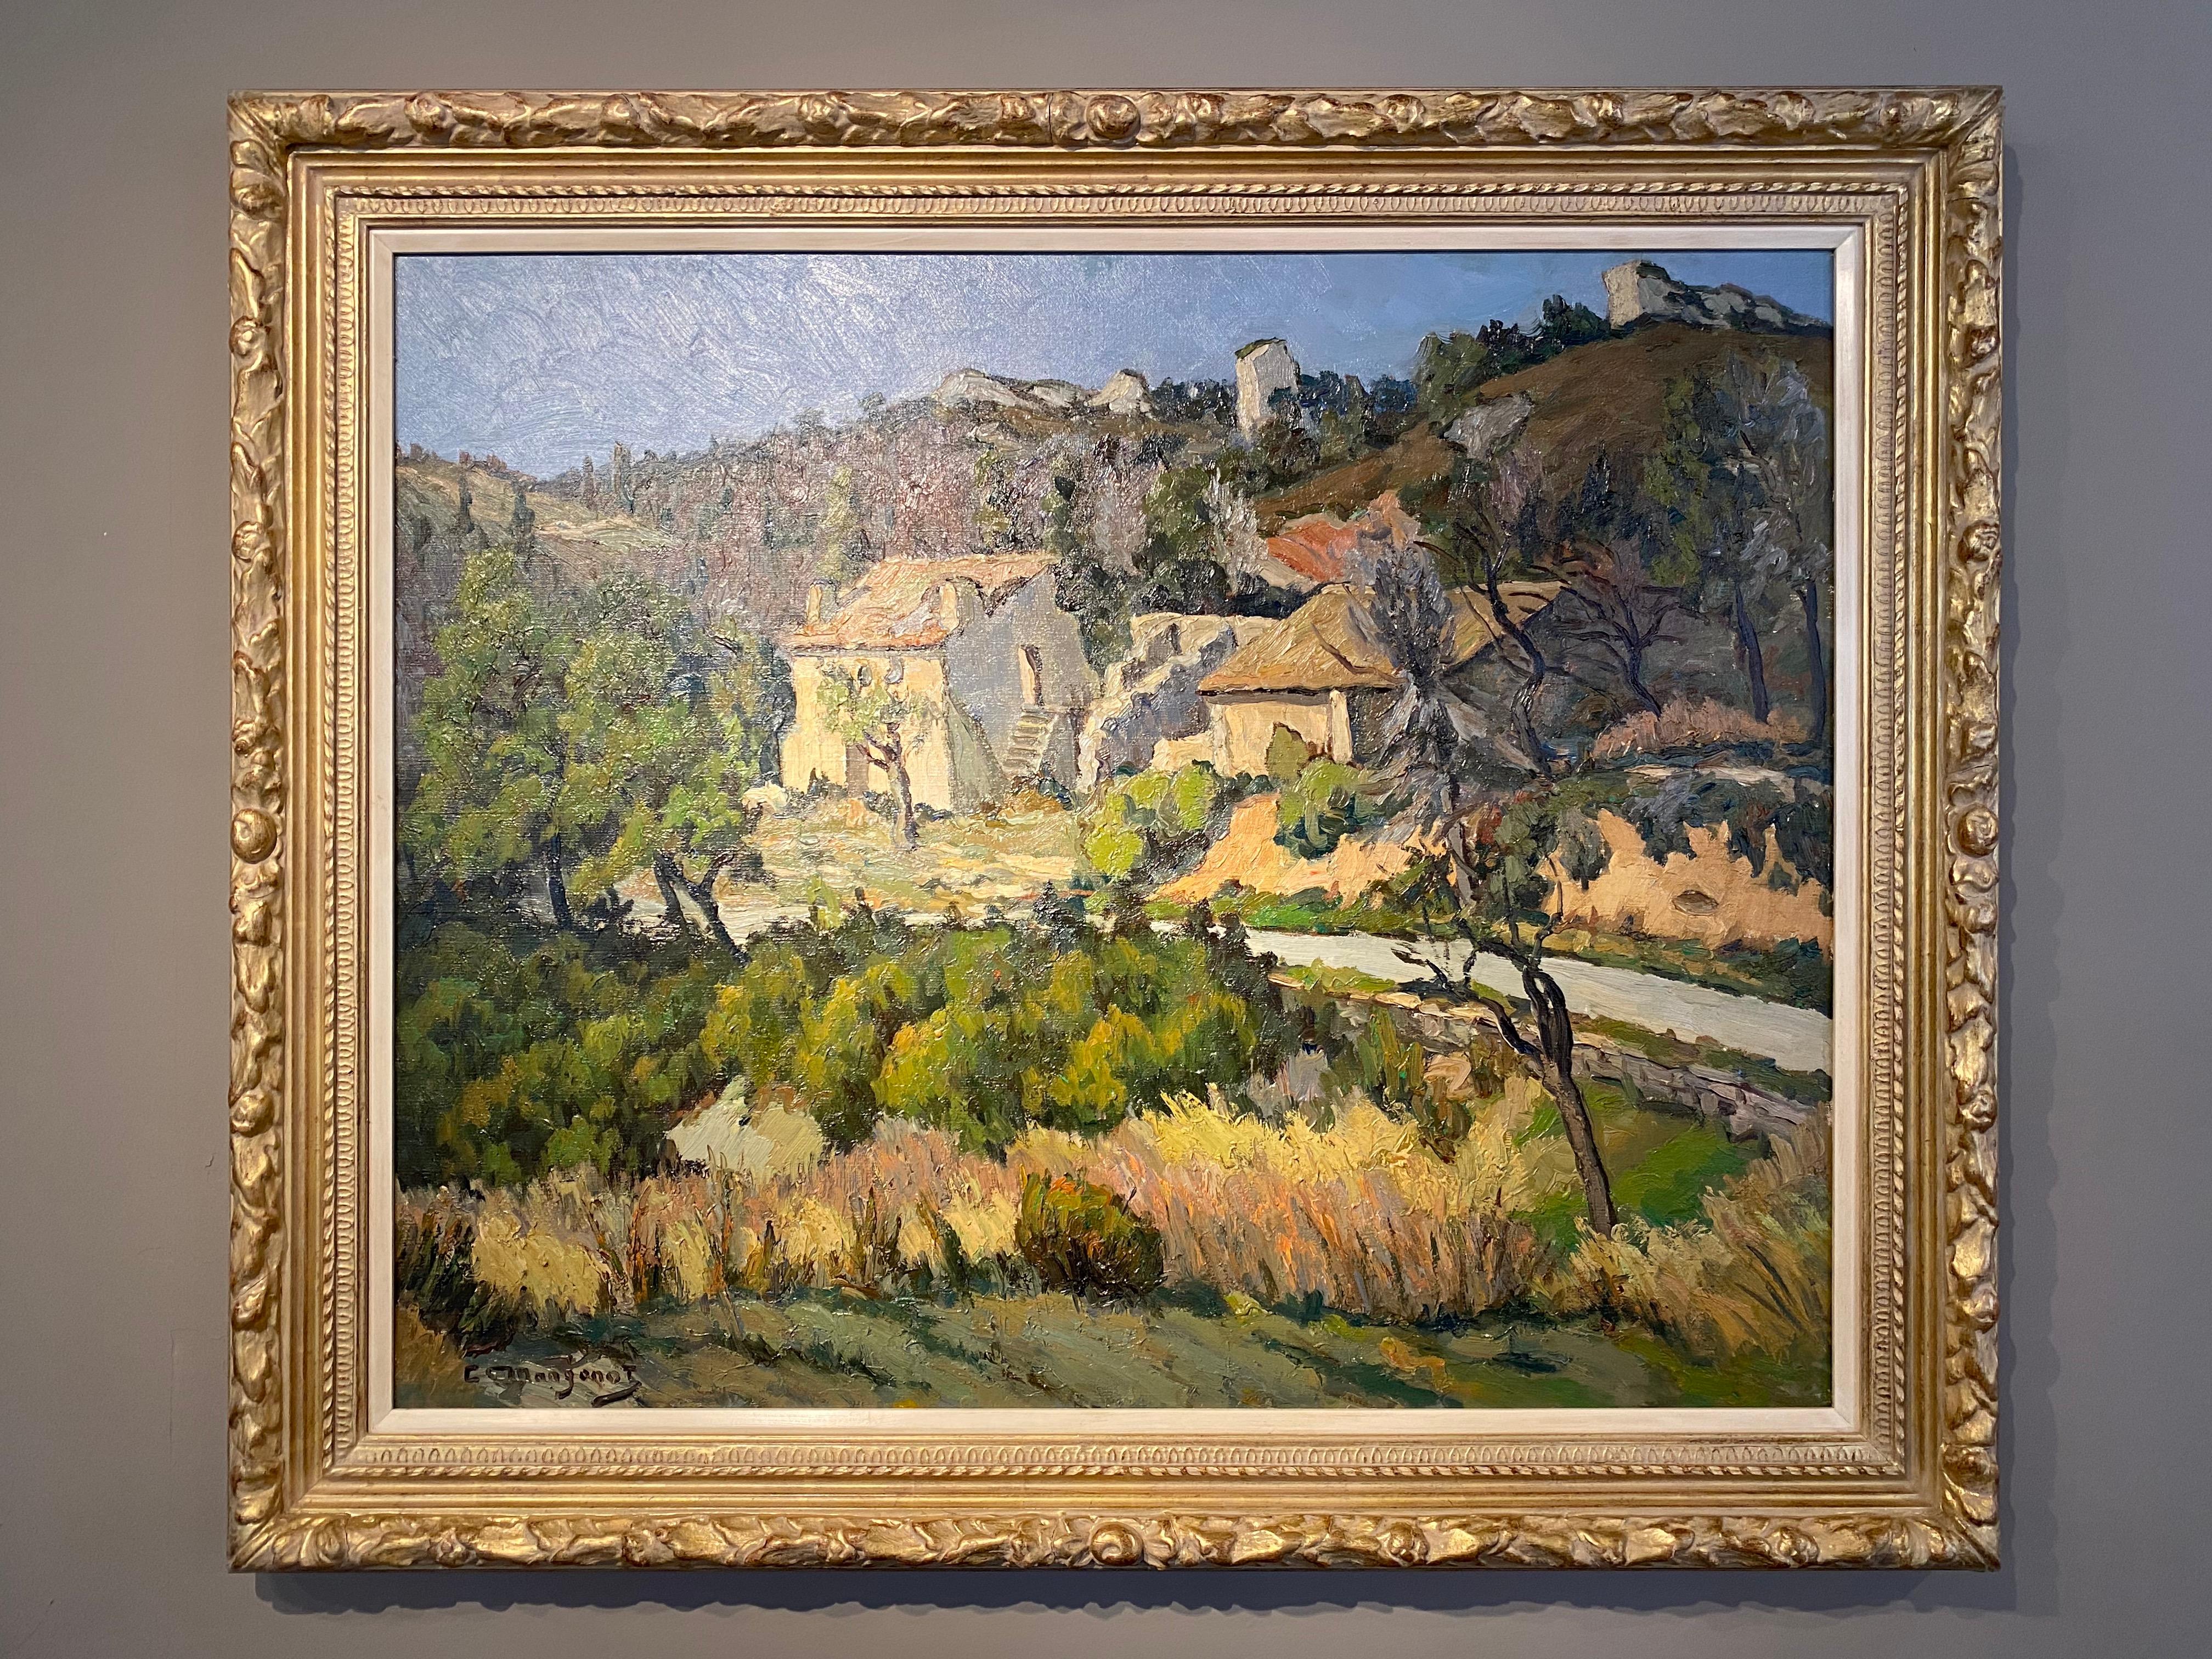 Emile Mangenot Landscape Painting - 'Olive Groves' Rural French Landscape painting of trees, cottage & greenery 